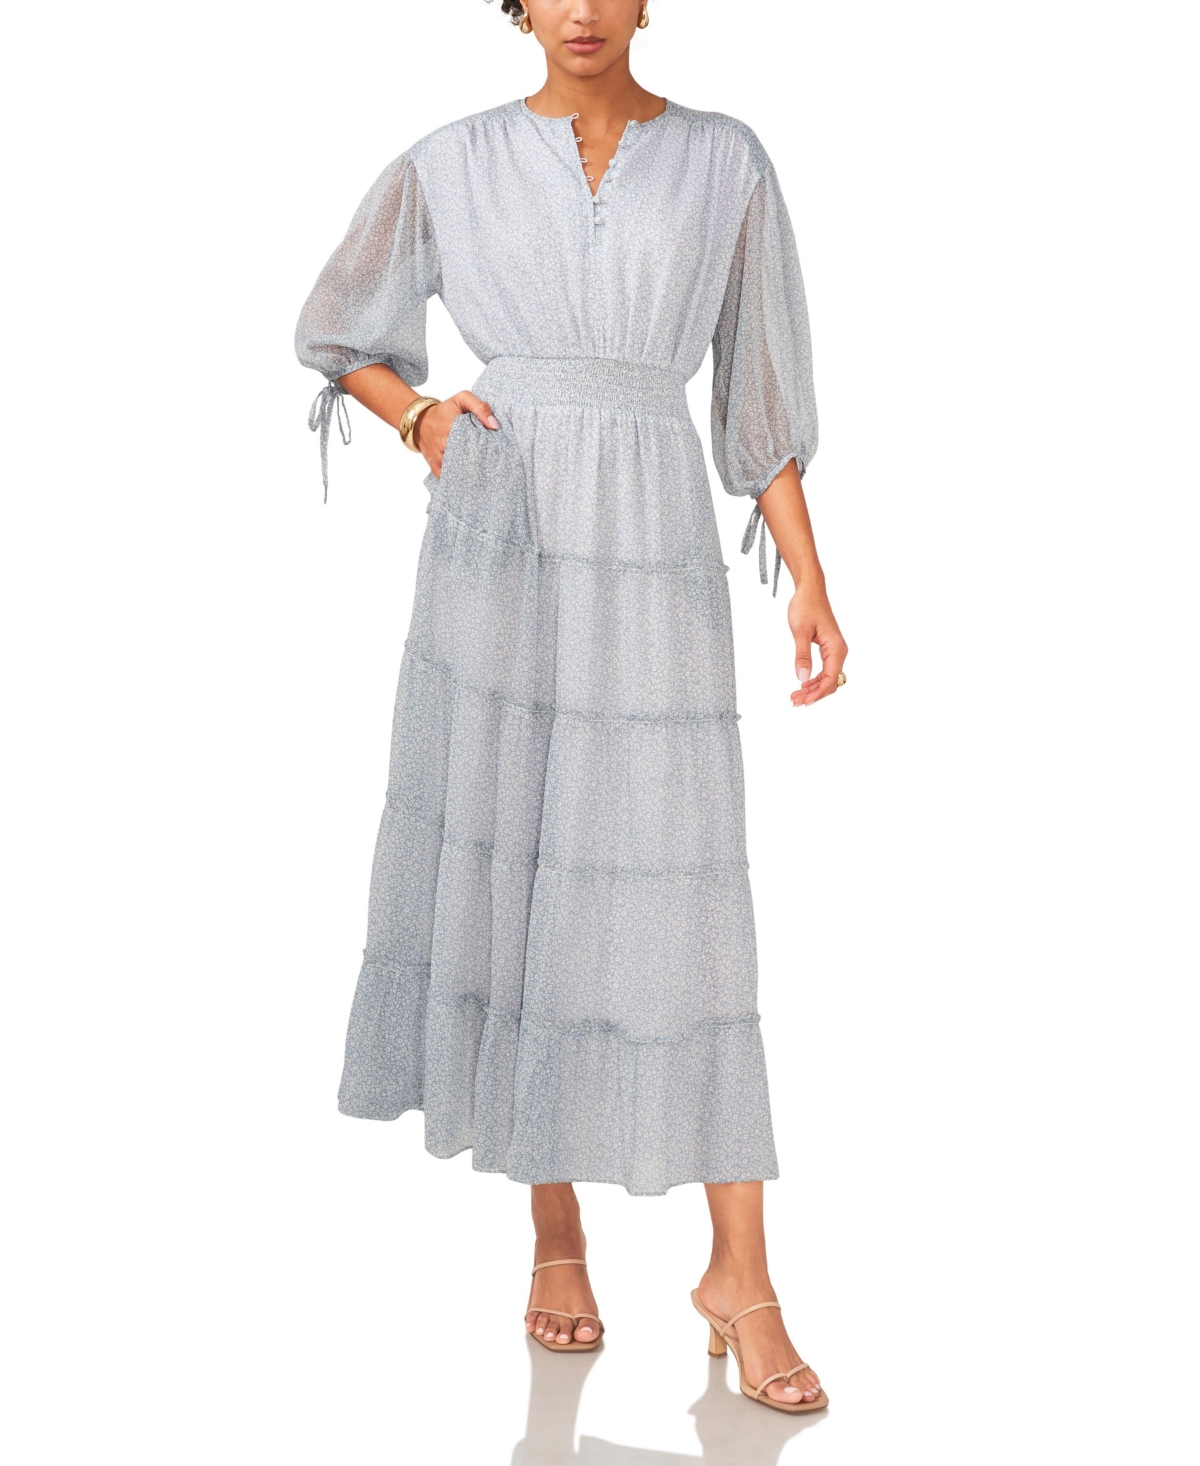 Women's Tiered Maxi Dress with Pin Tucks - New Ivory